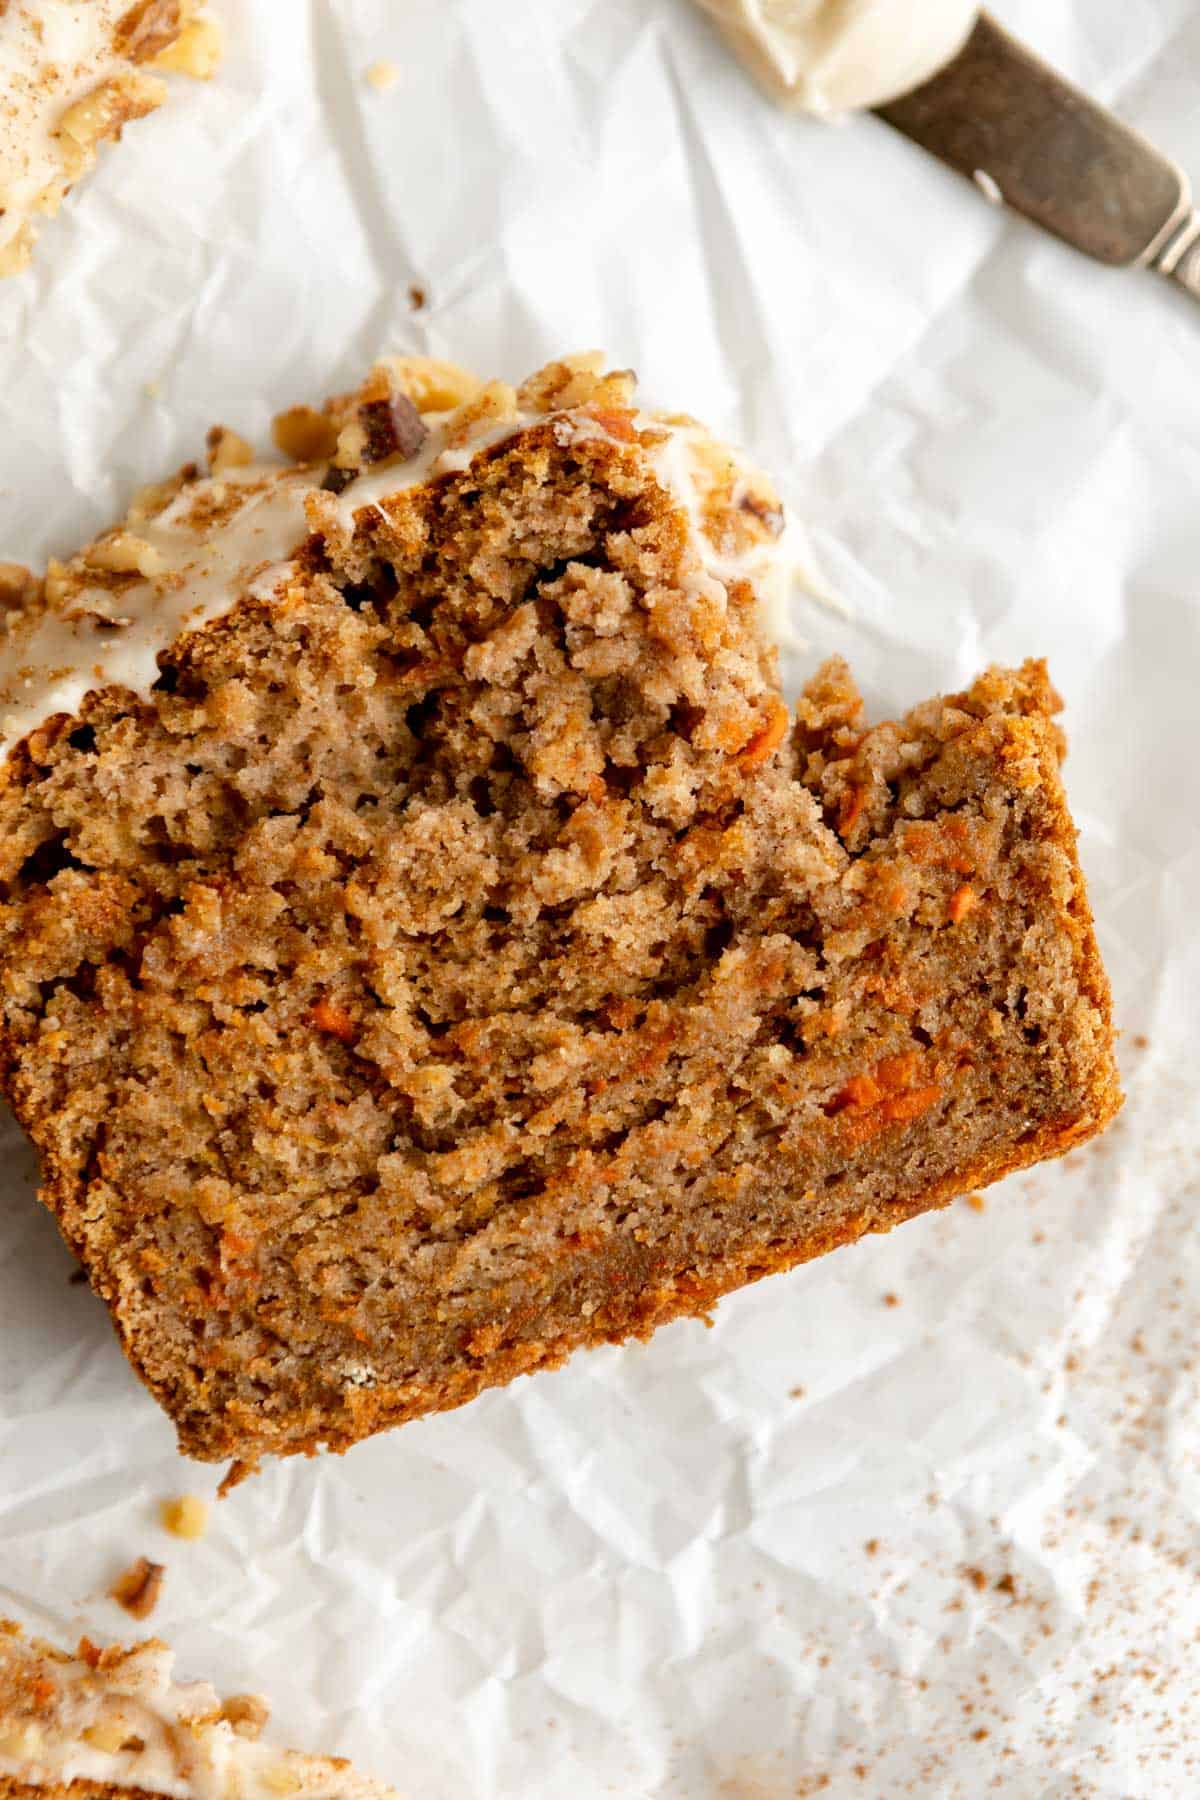 gluten free banana bread with carrot and spices on parchment paper